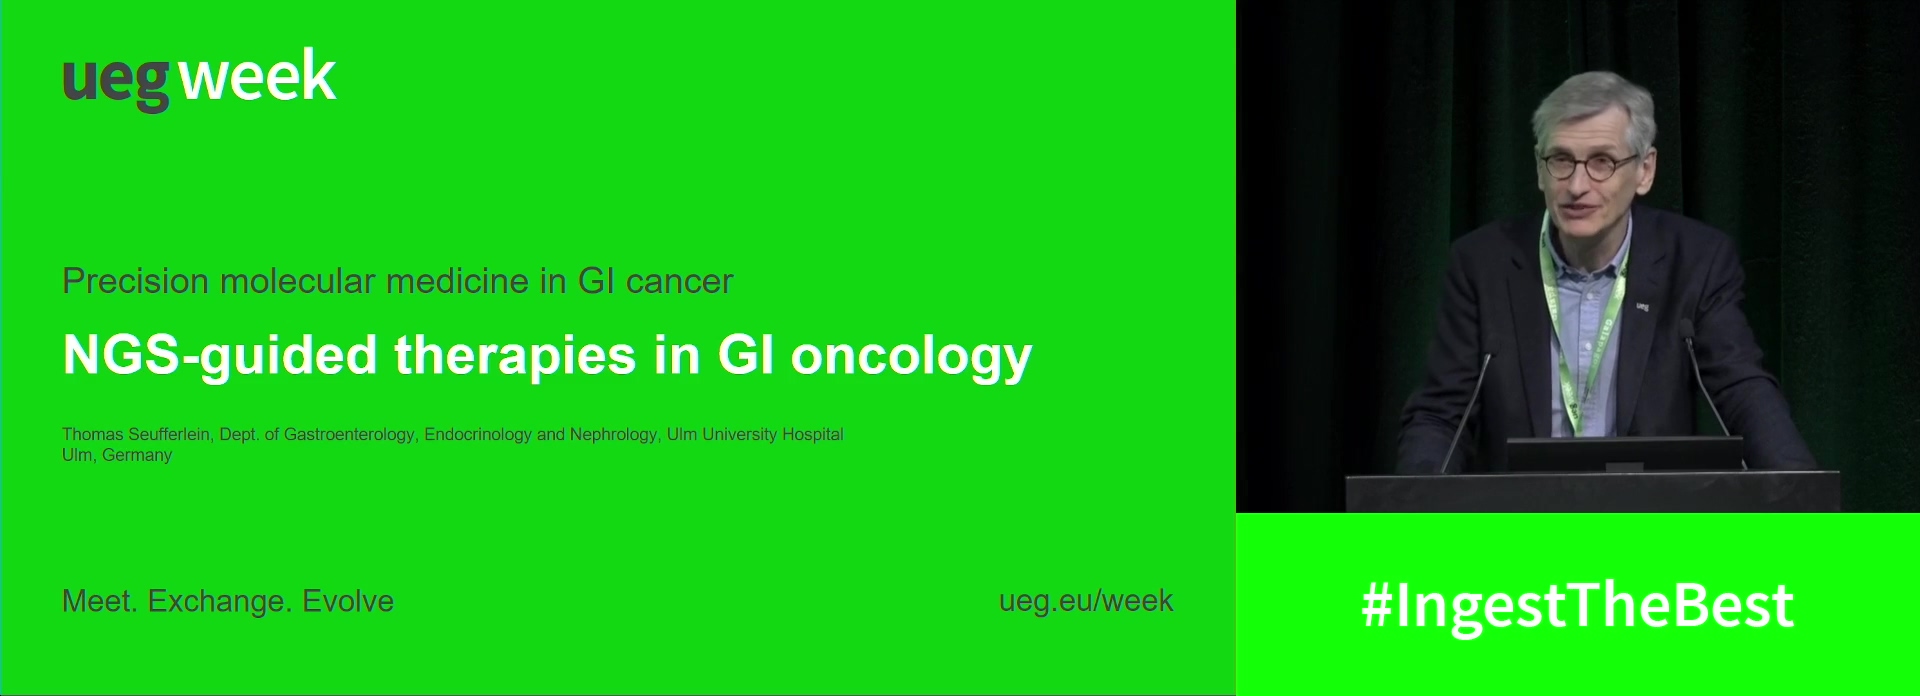 NGS-guided therapies in GI oncology